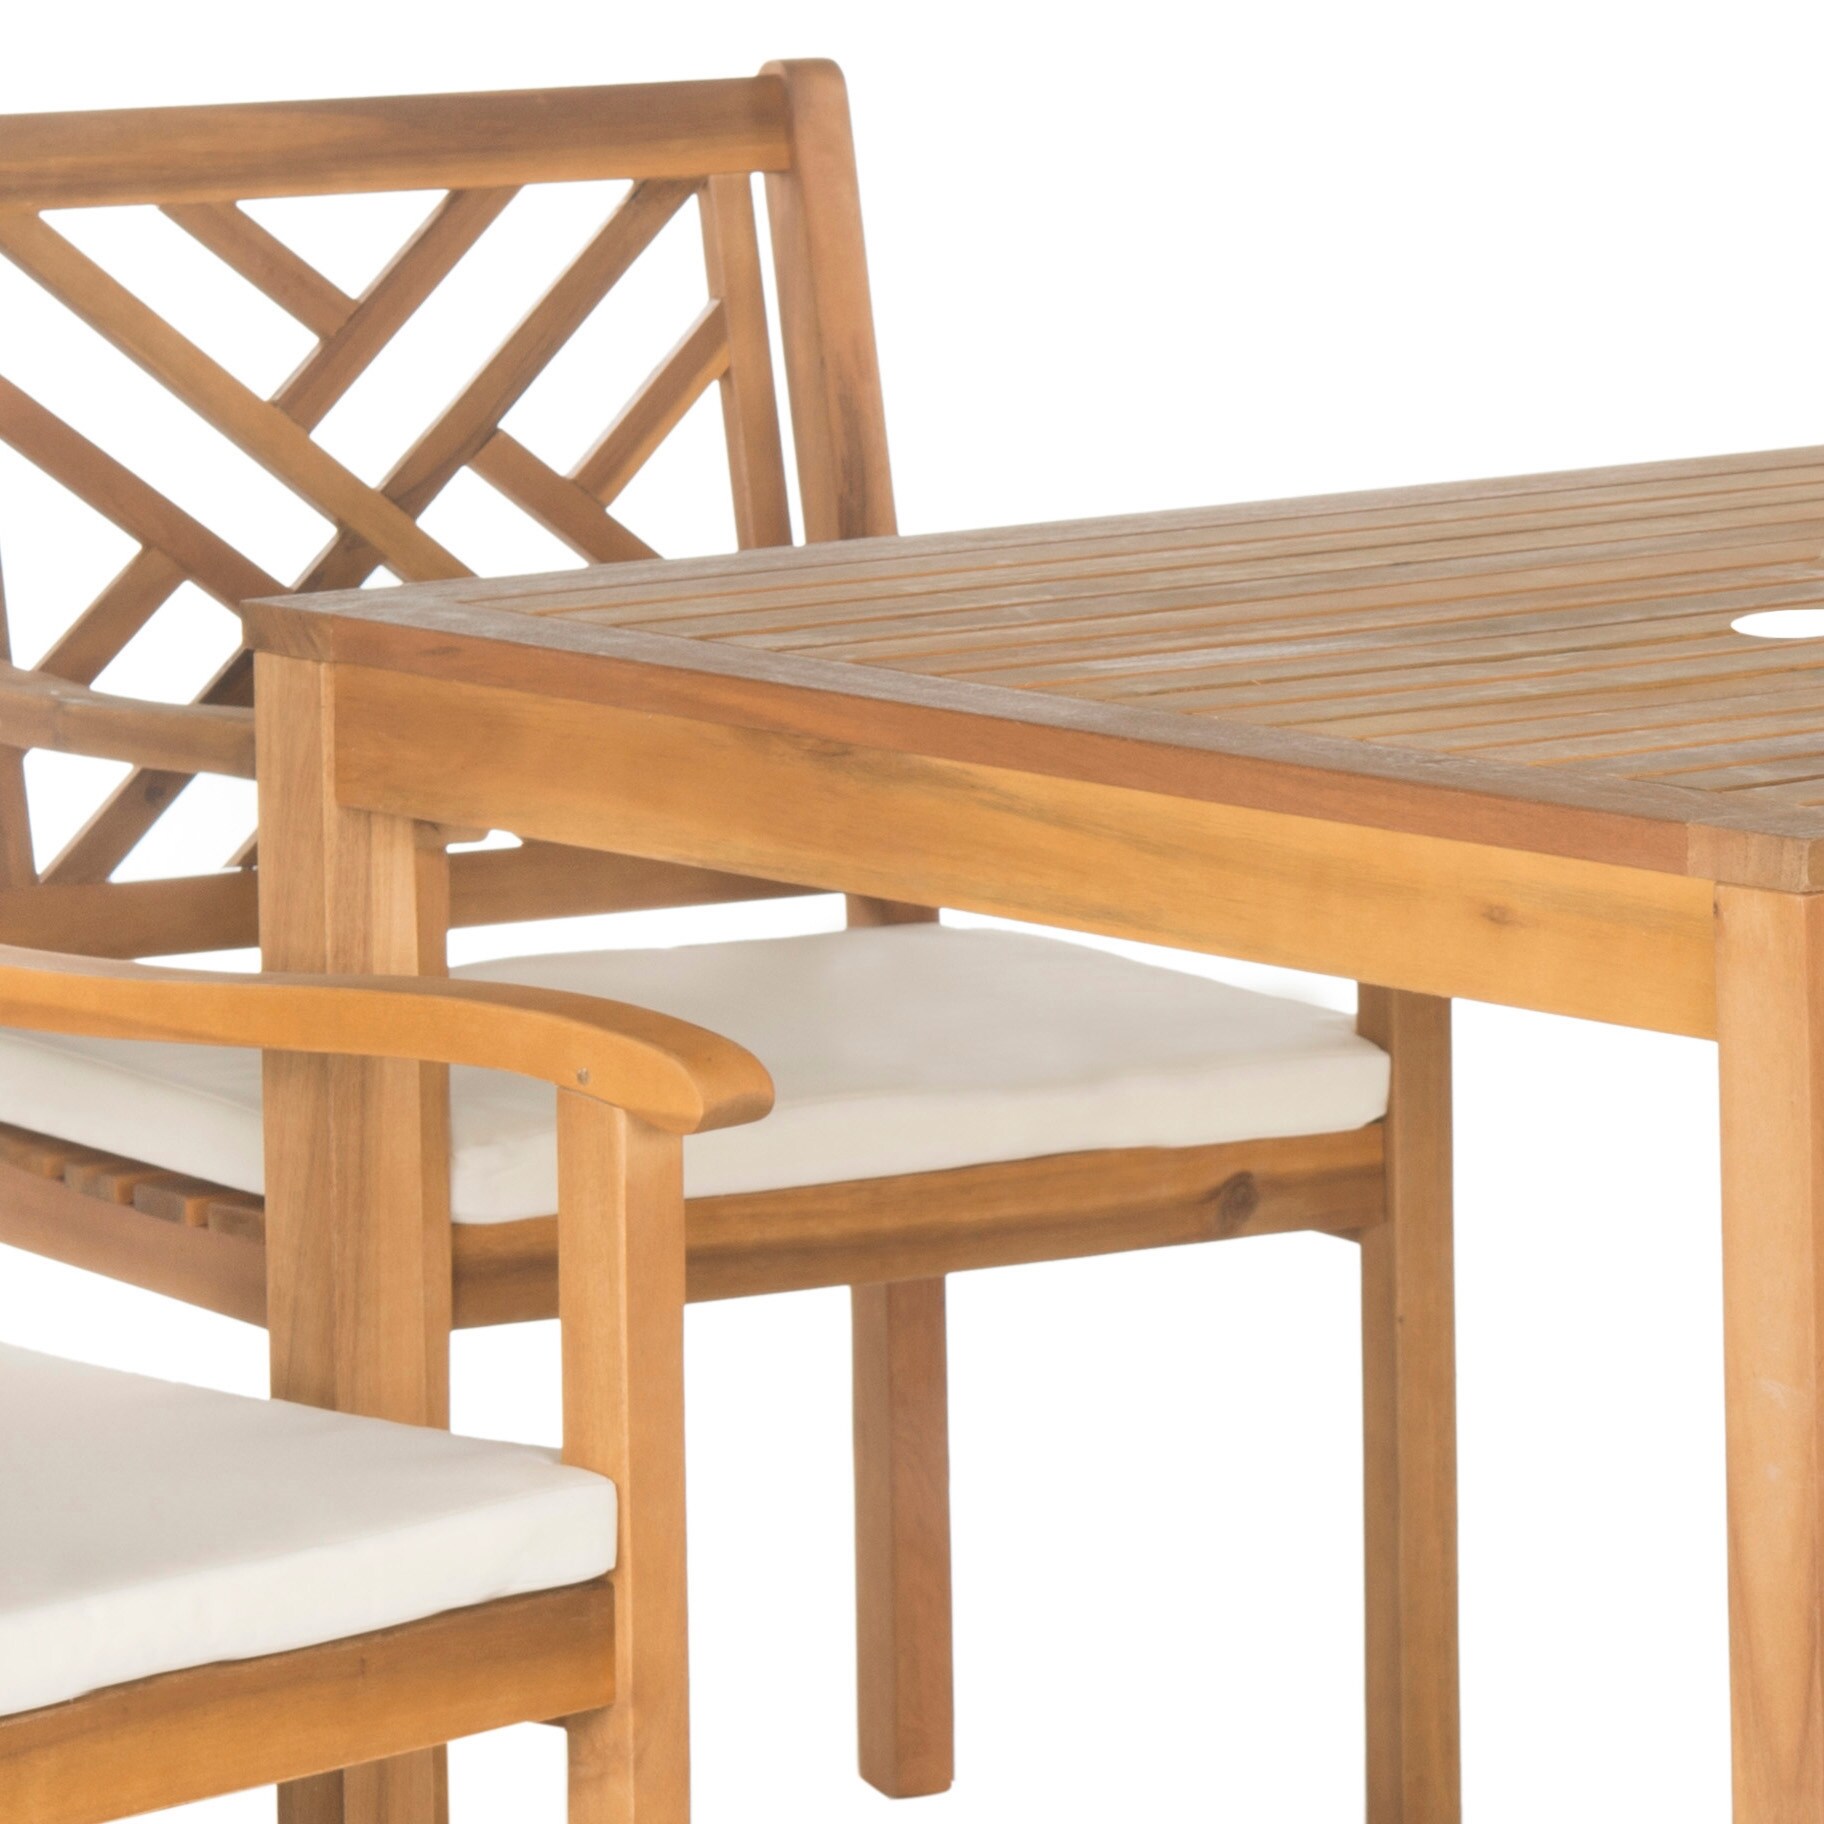 Wooden table 90x90 for garden or terrace - Knit